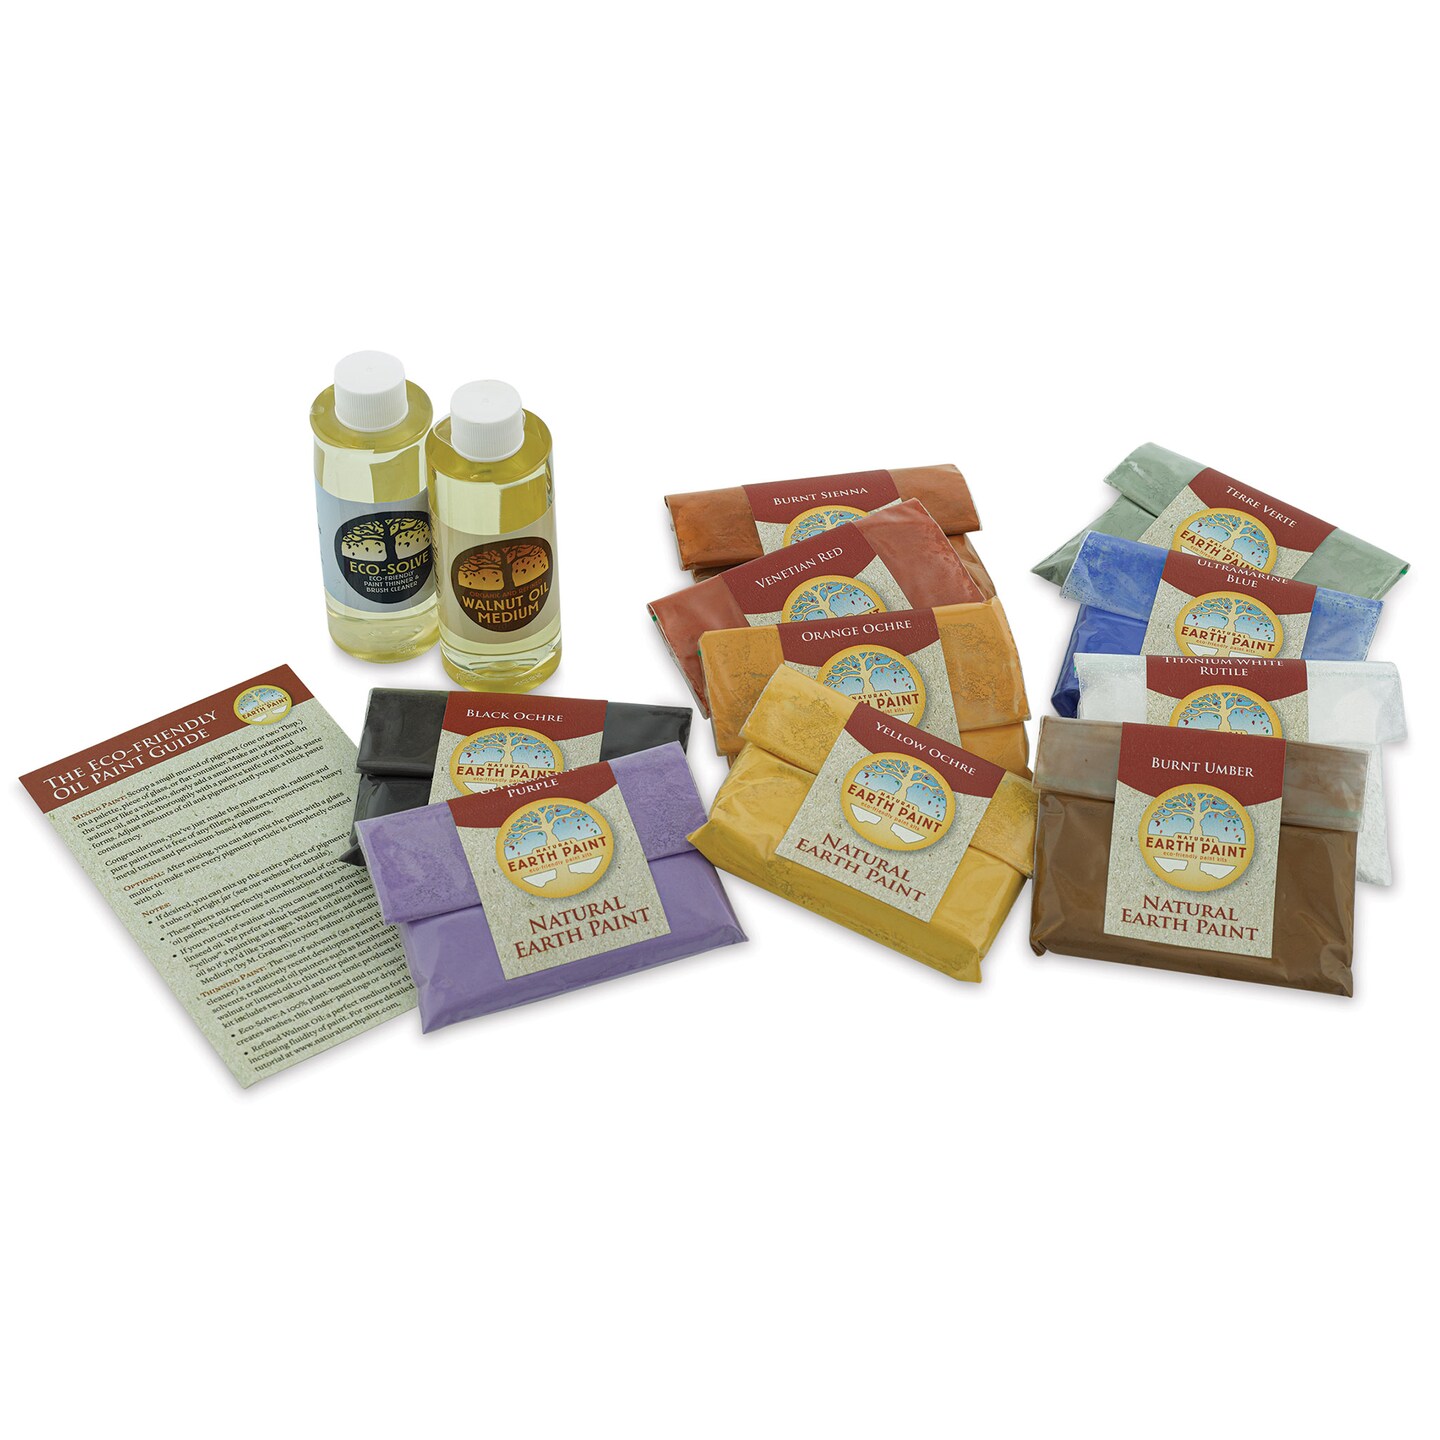 Natural Earth Paint Complete Oil Paint Kit